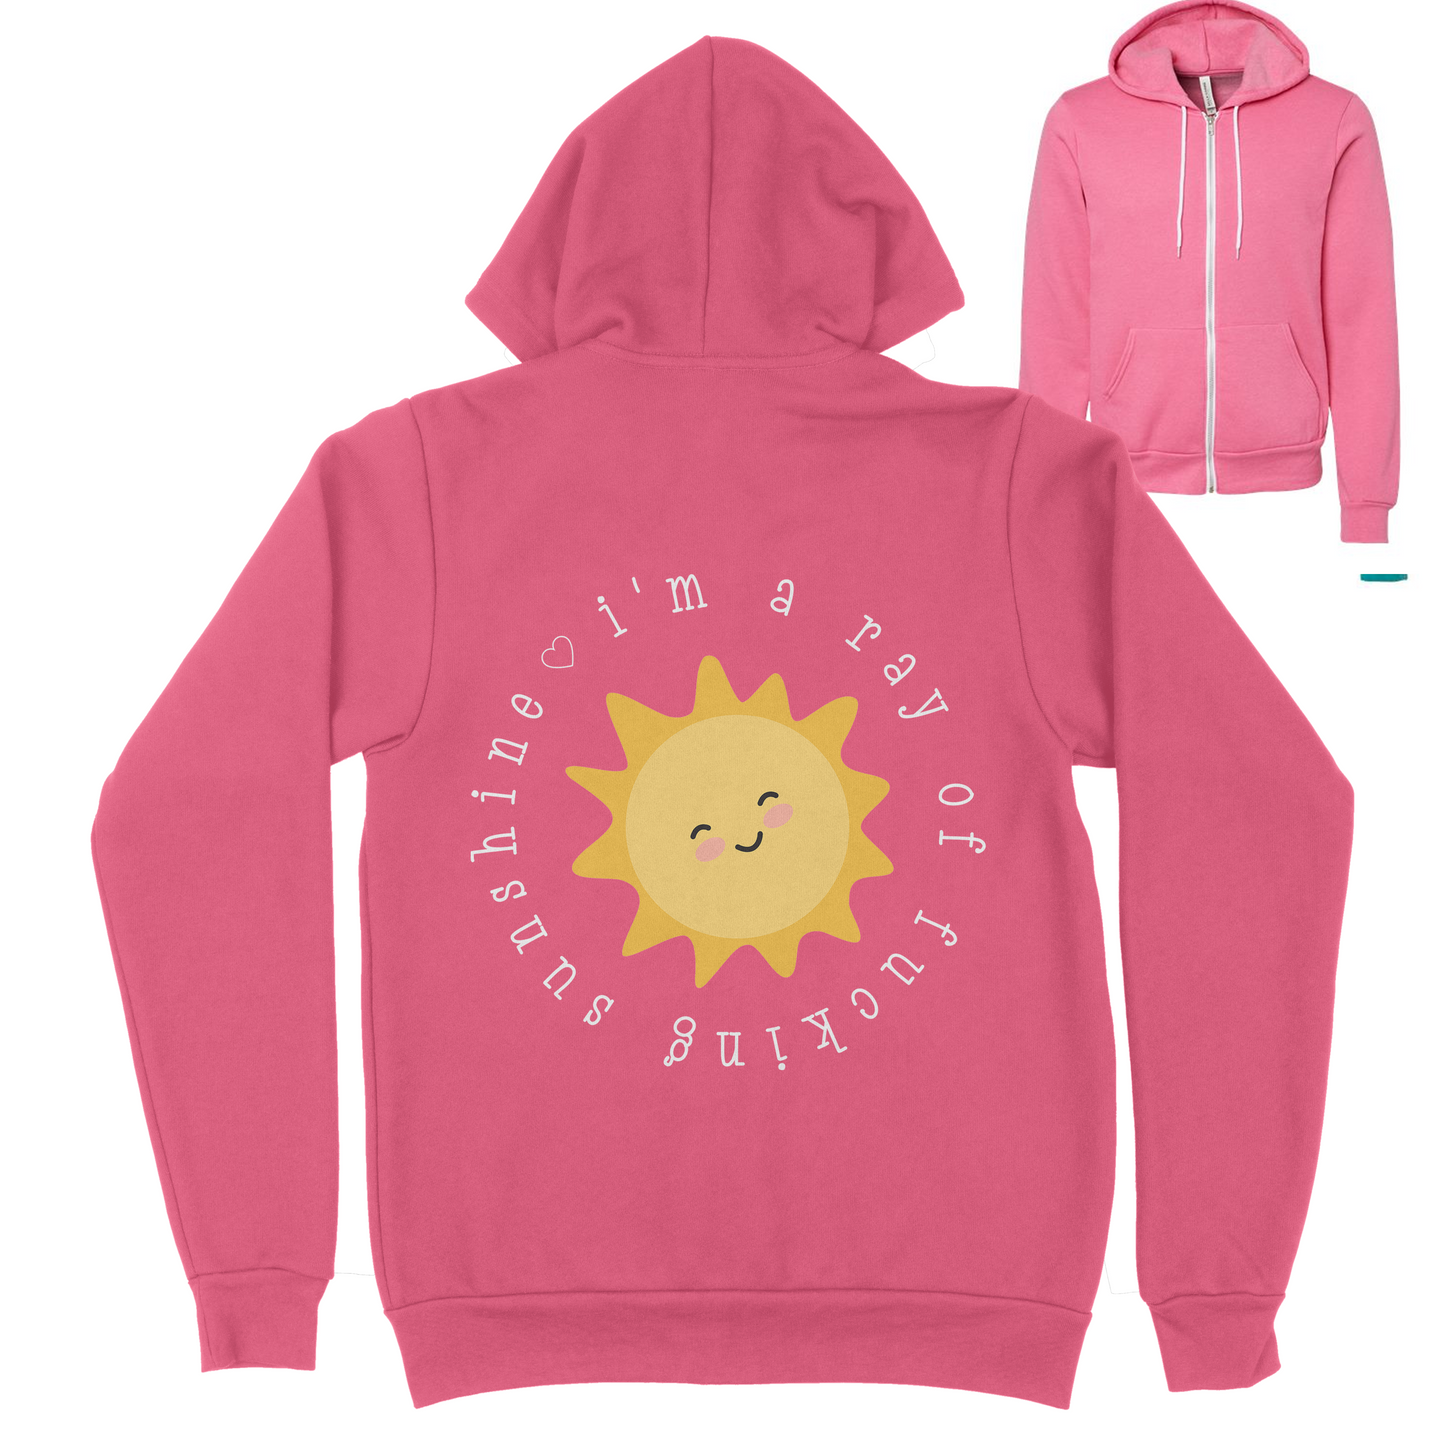 I'm A Ray Of Sunshine Zip Up Hoodie